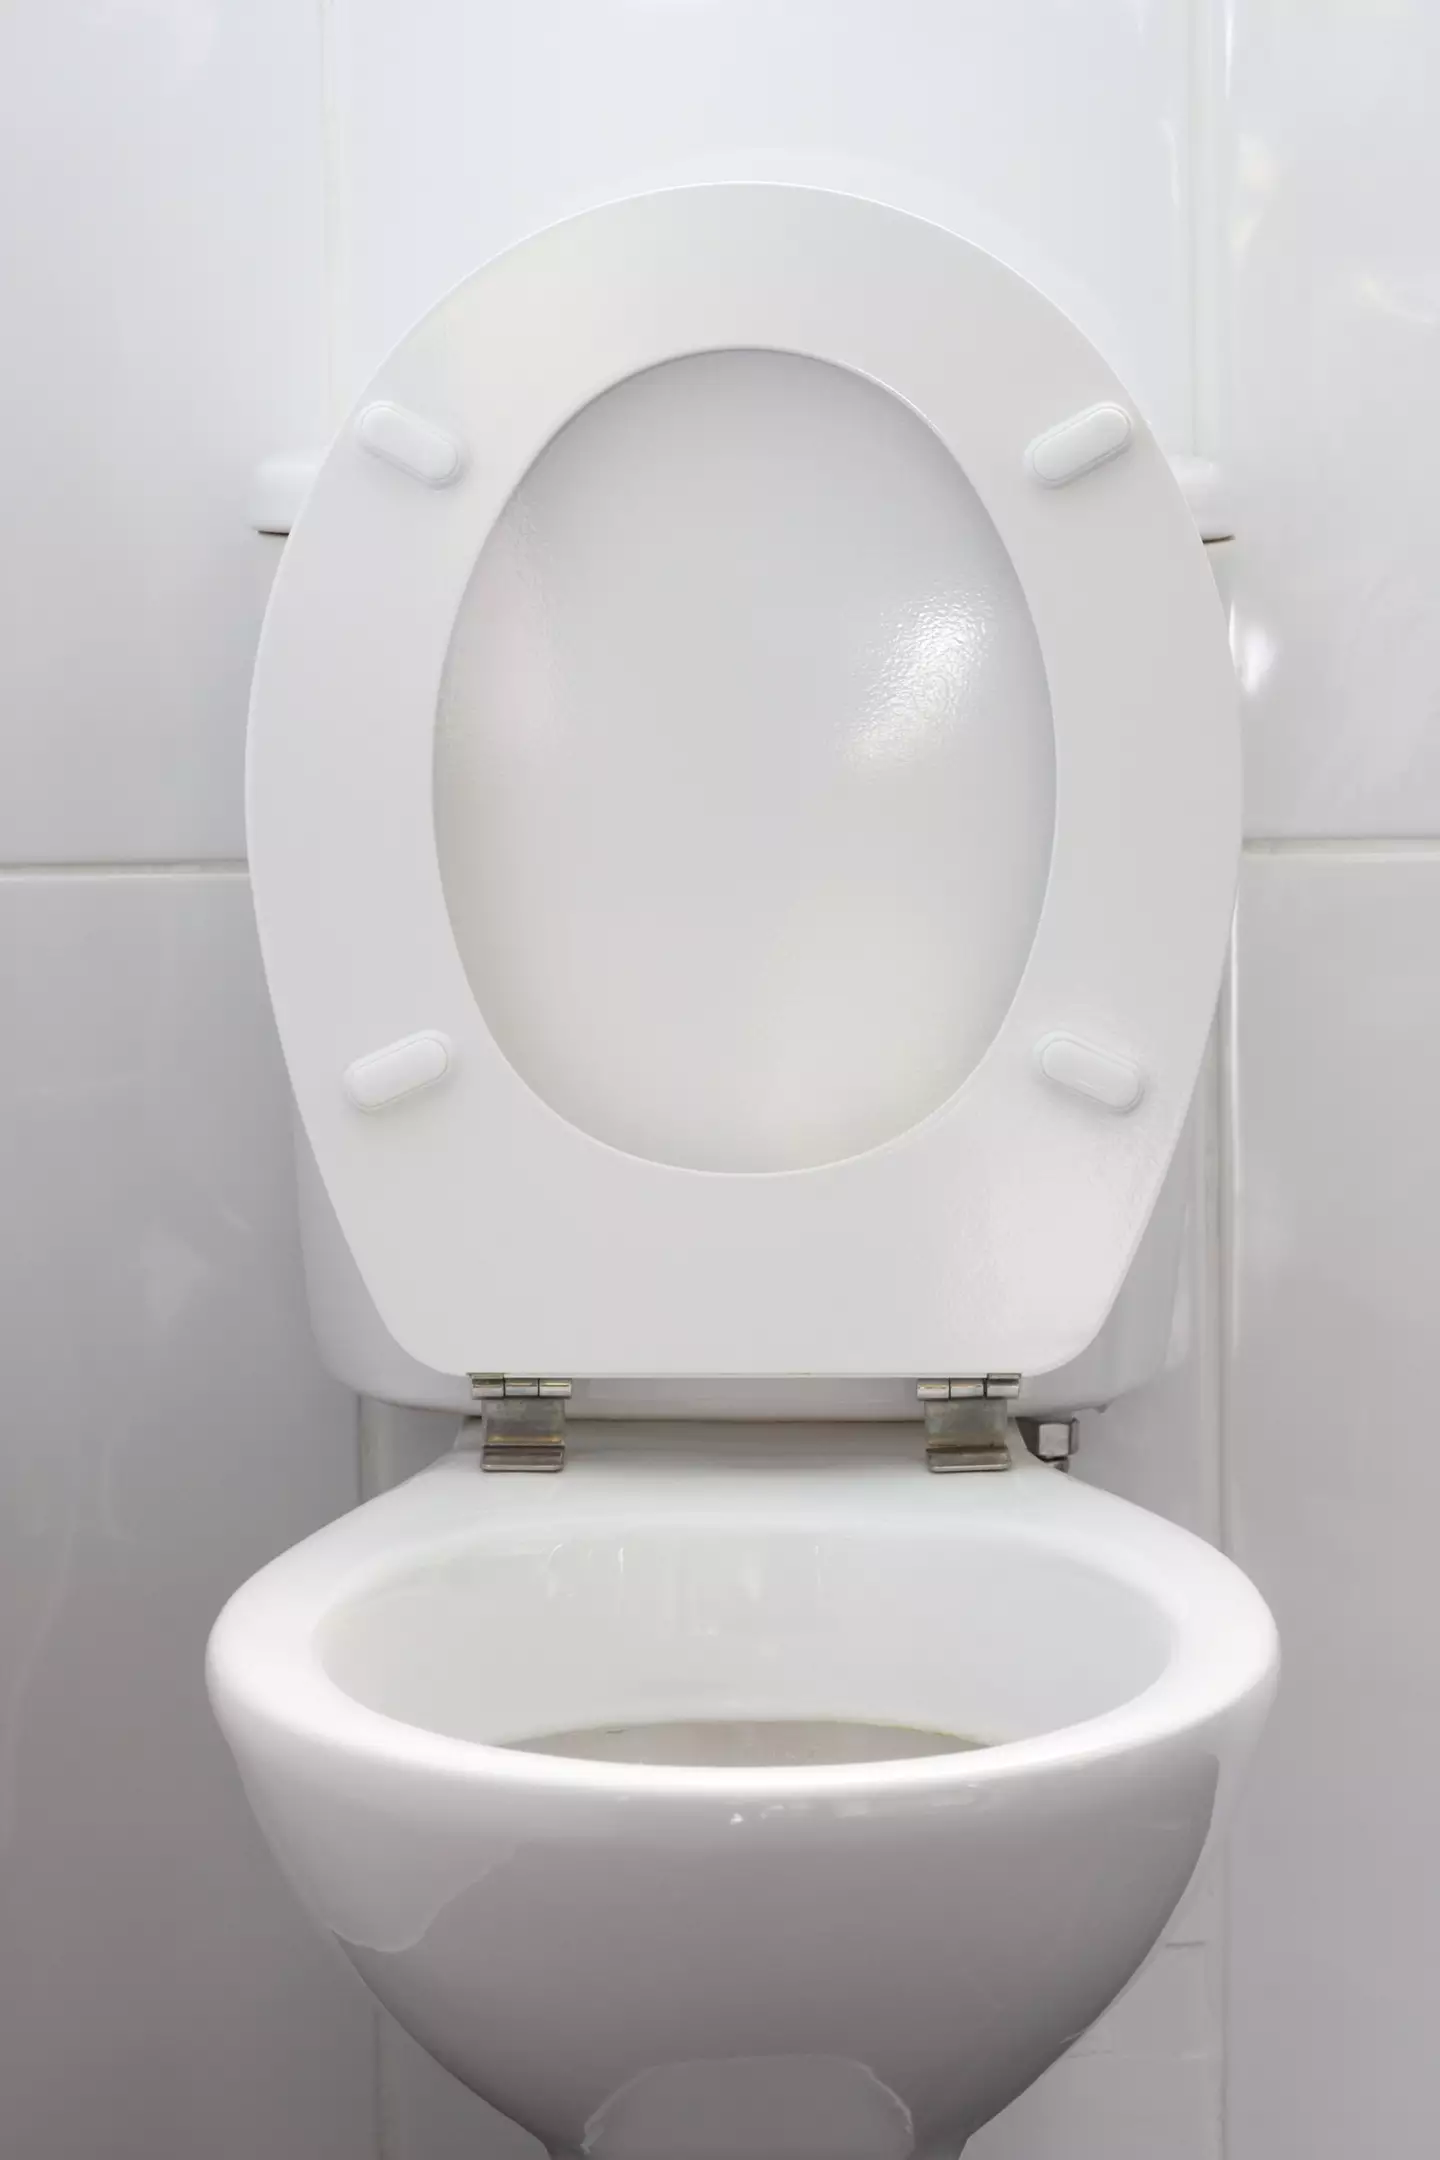 The woman claimed that the co-worker's wife clogged up their toilet.